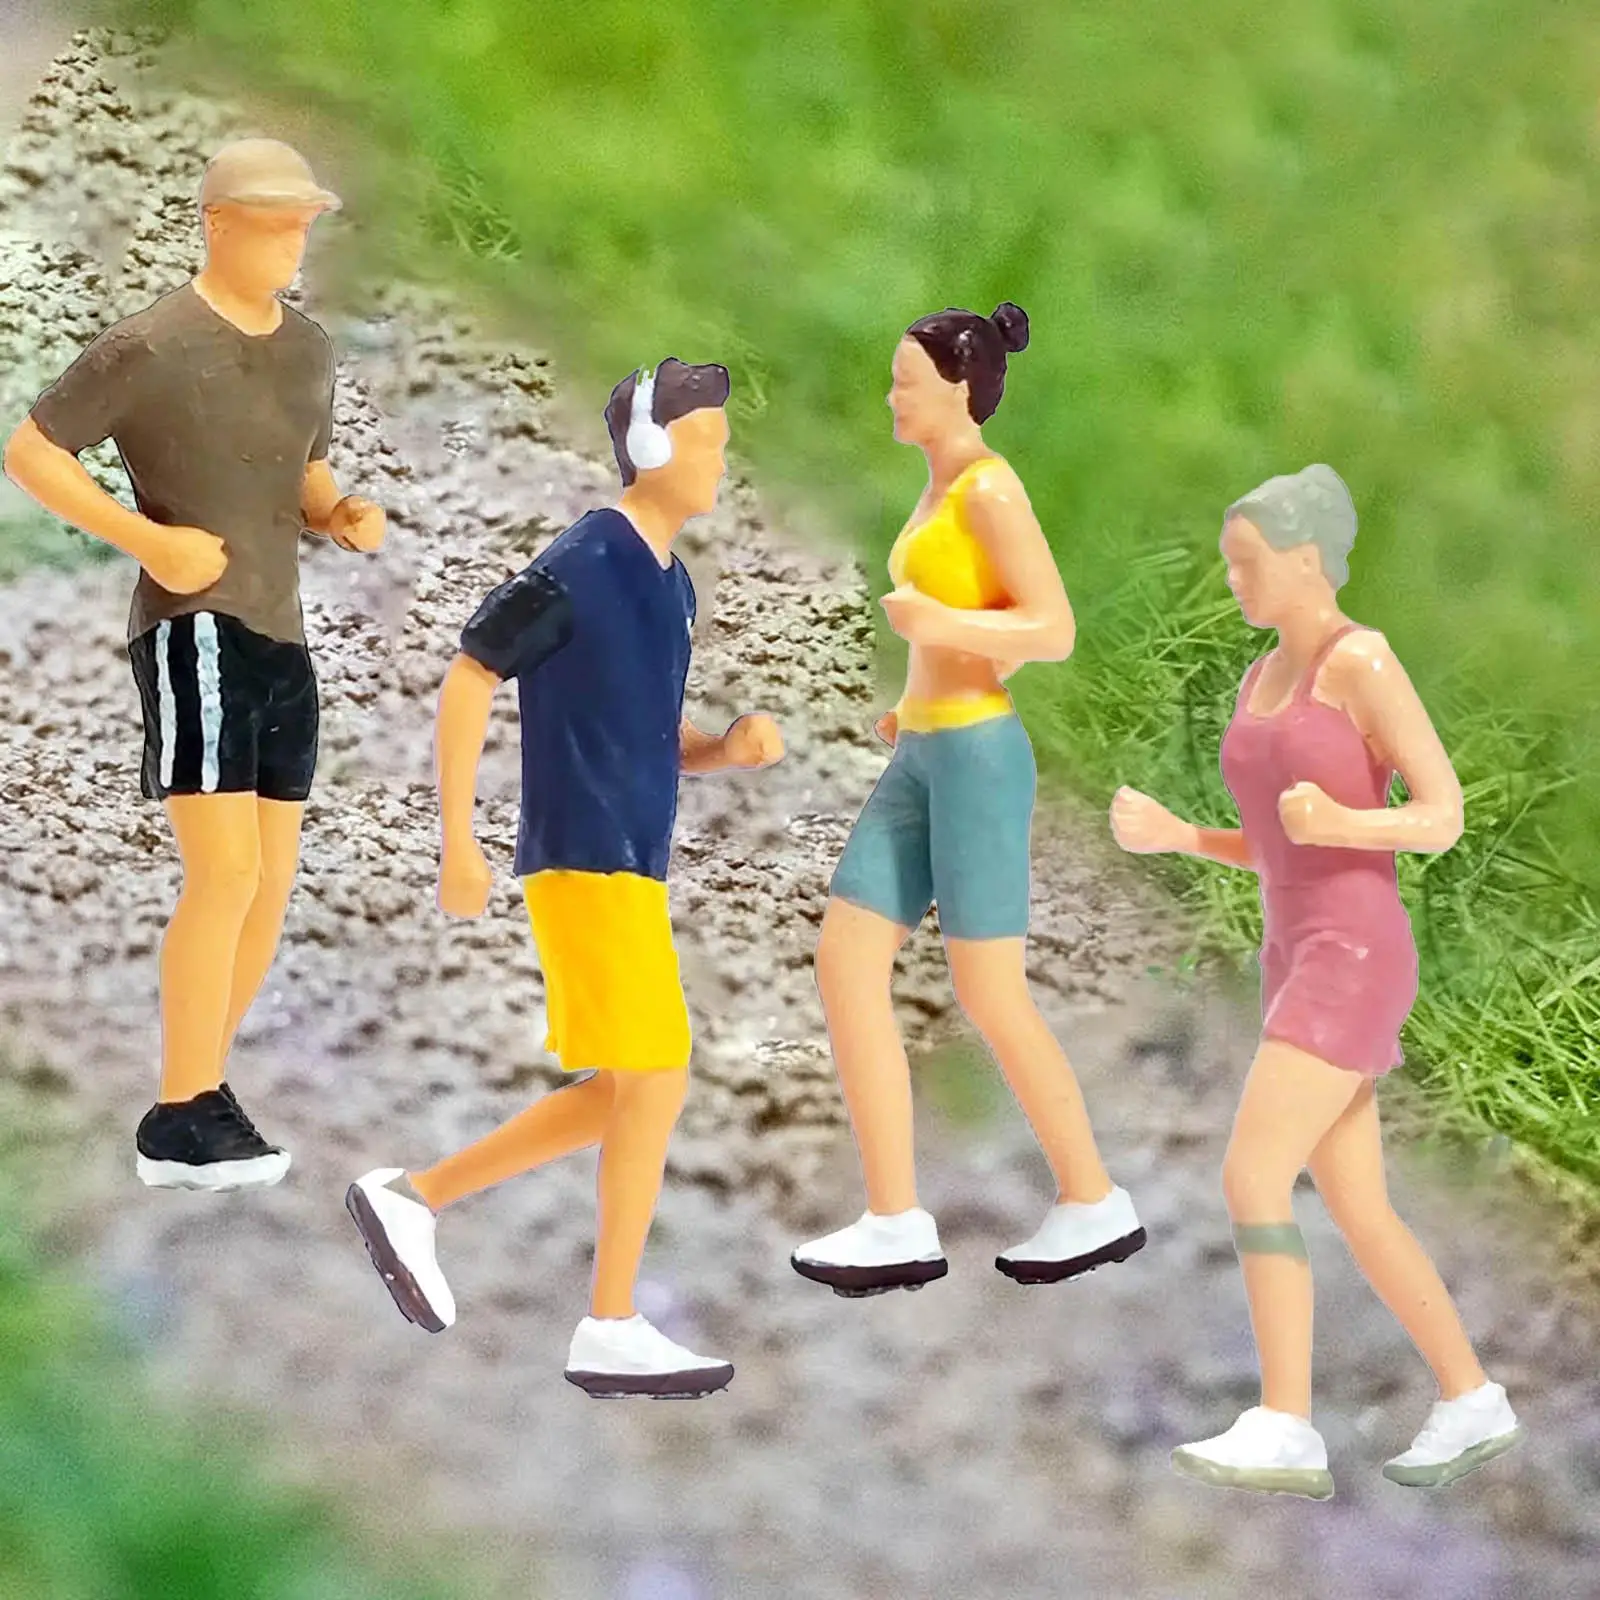 Miniature Figures for Sports Enthusiasts - Handcrafted Resin Models in Various Poses